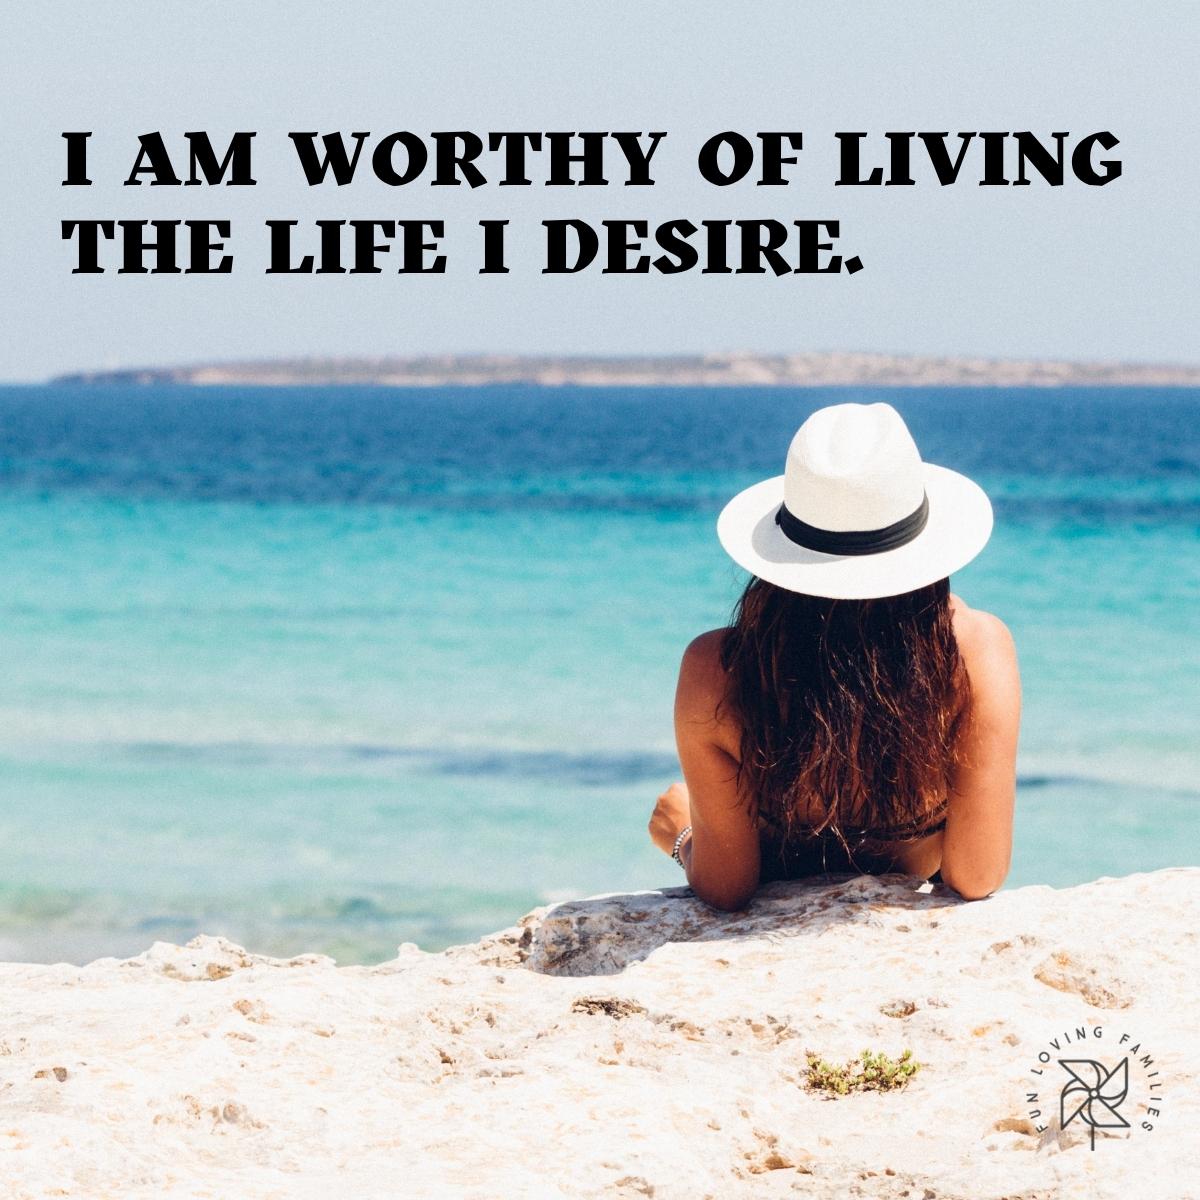 I am worthy of living the life I desire affirmation